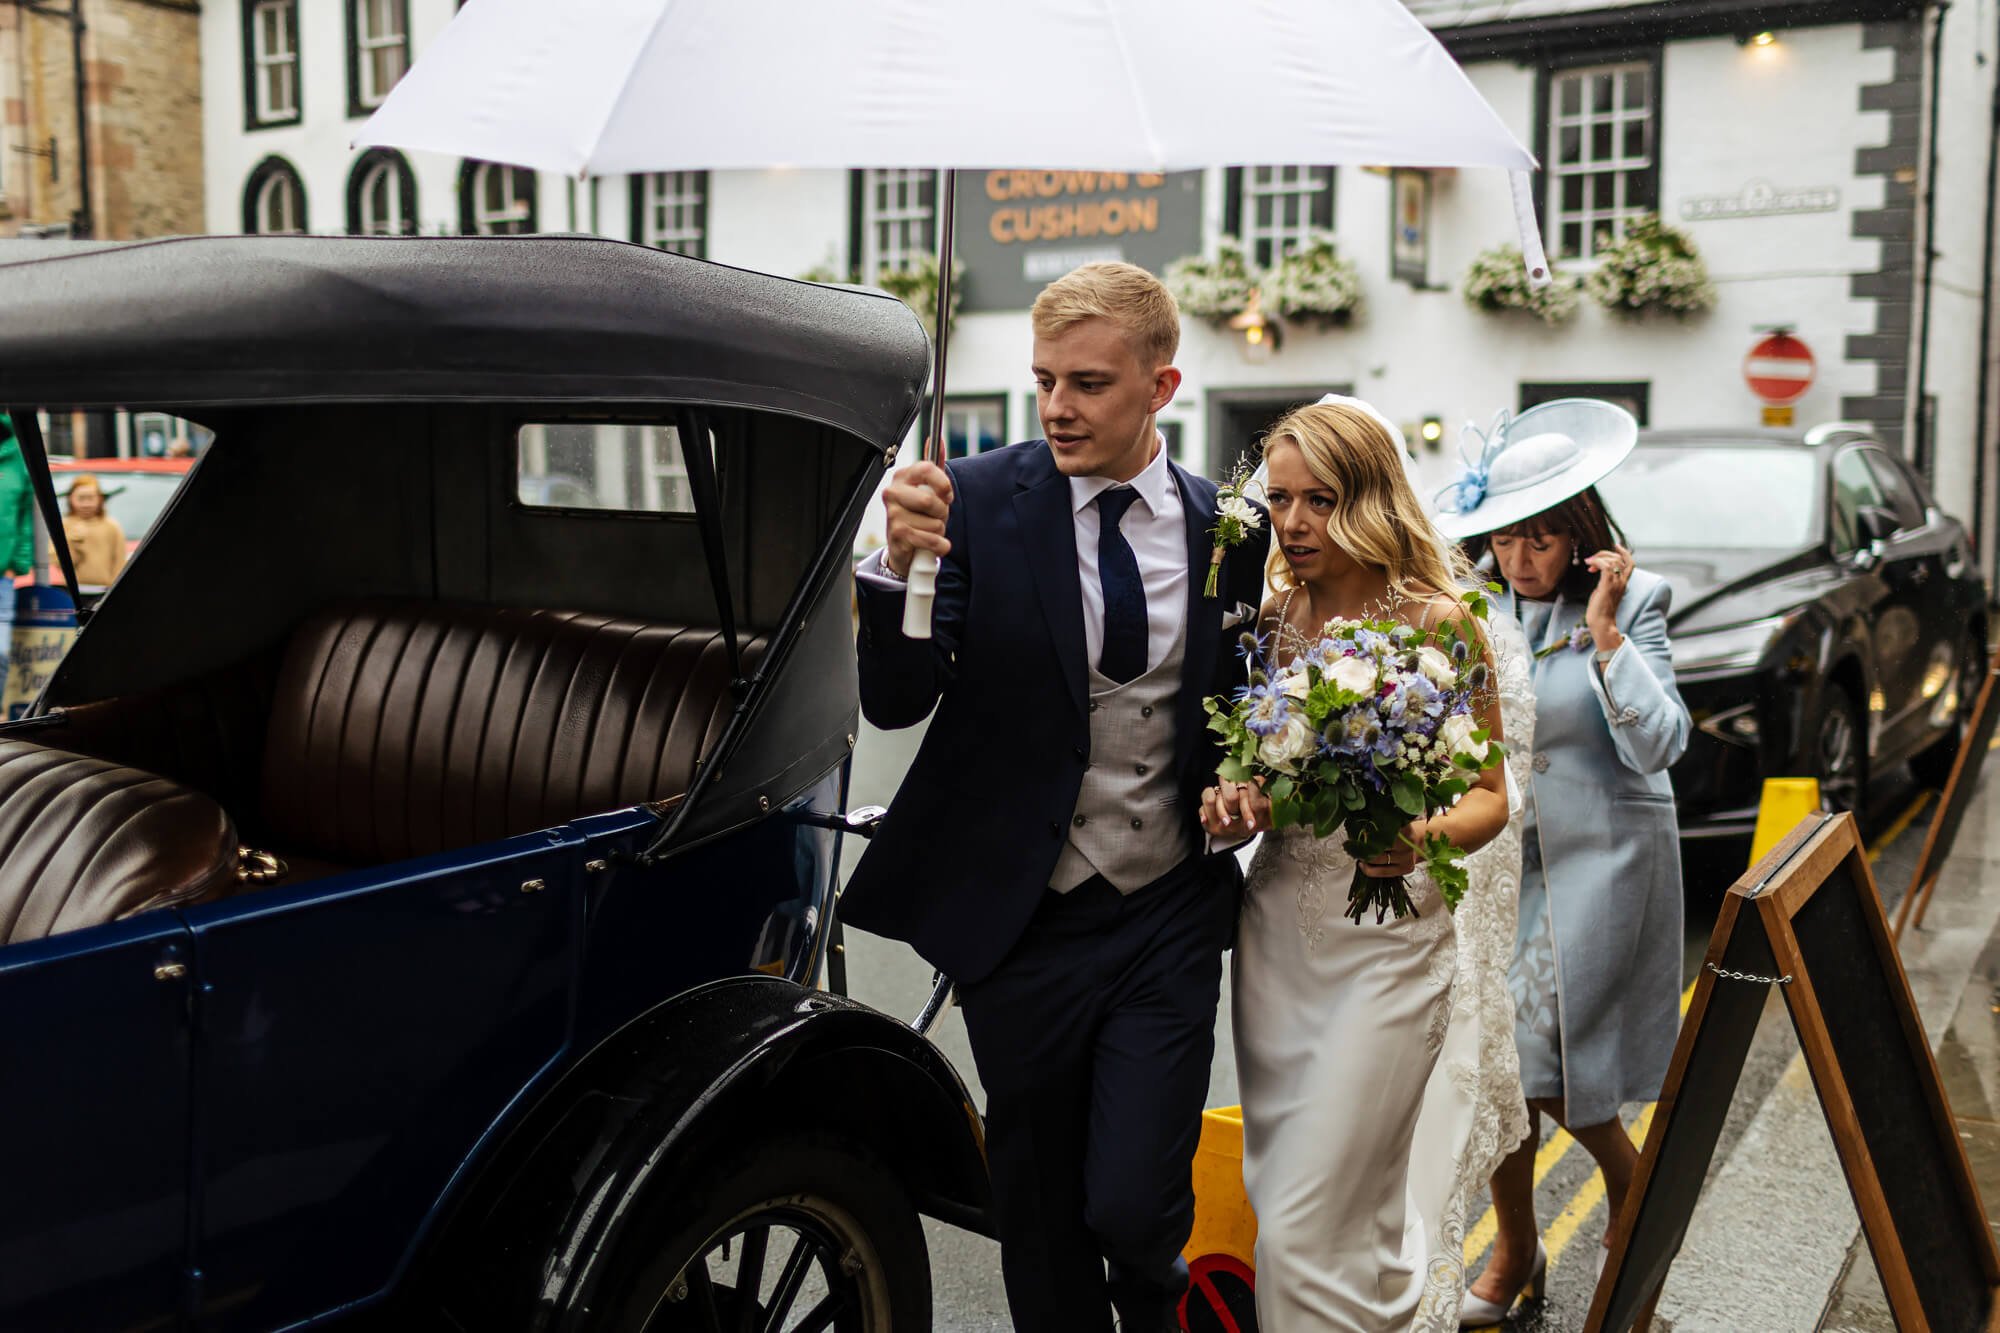 Bride and groom getting into a vintage car after their wedding